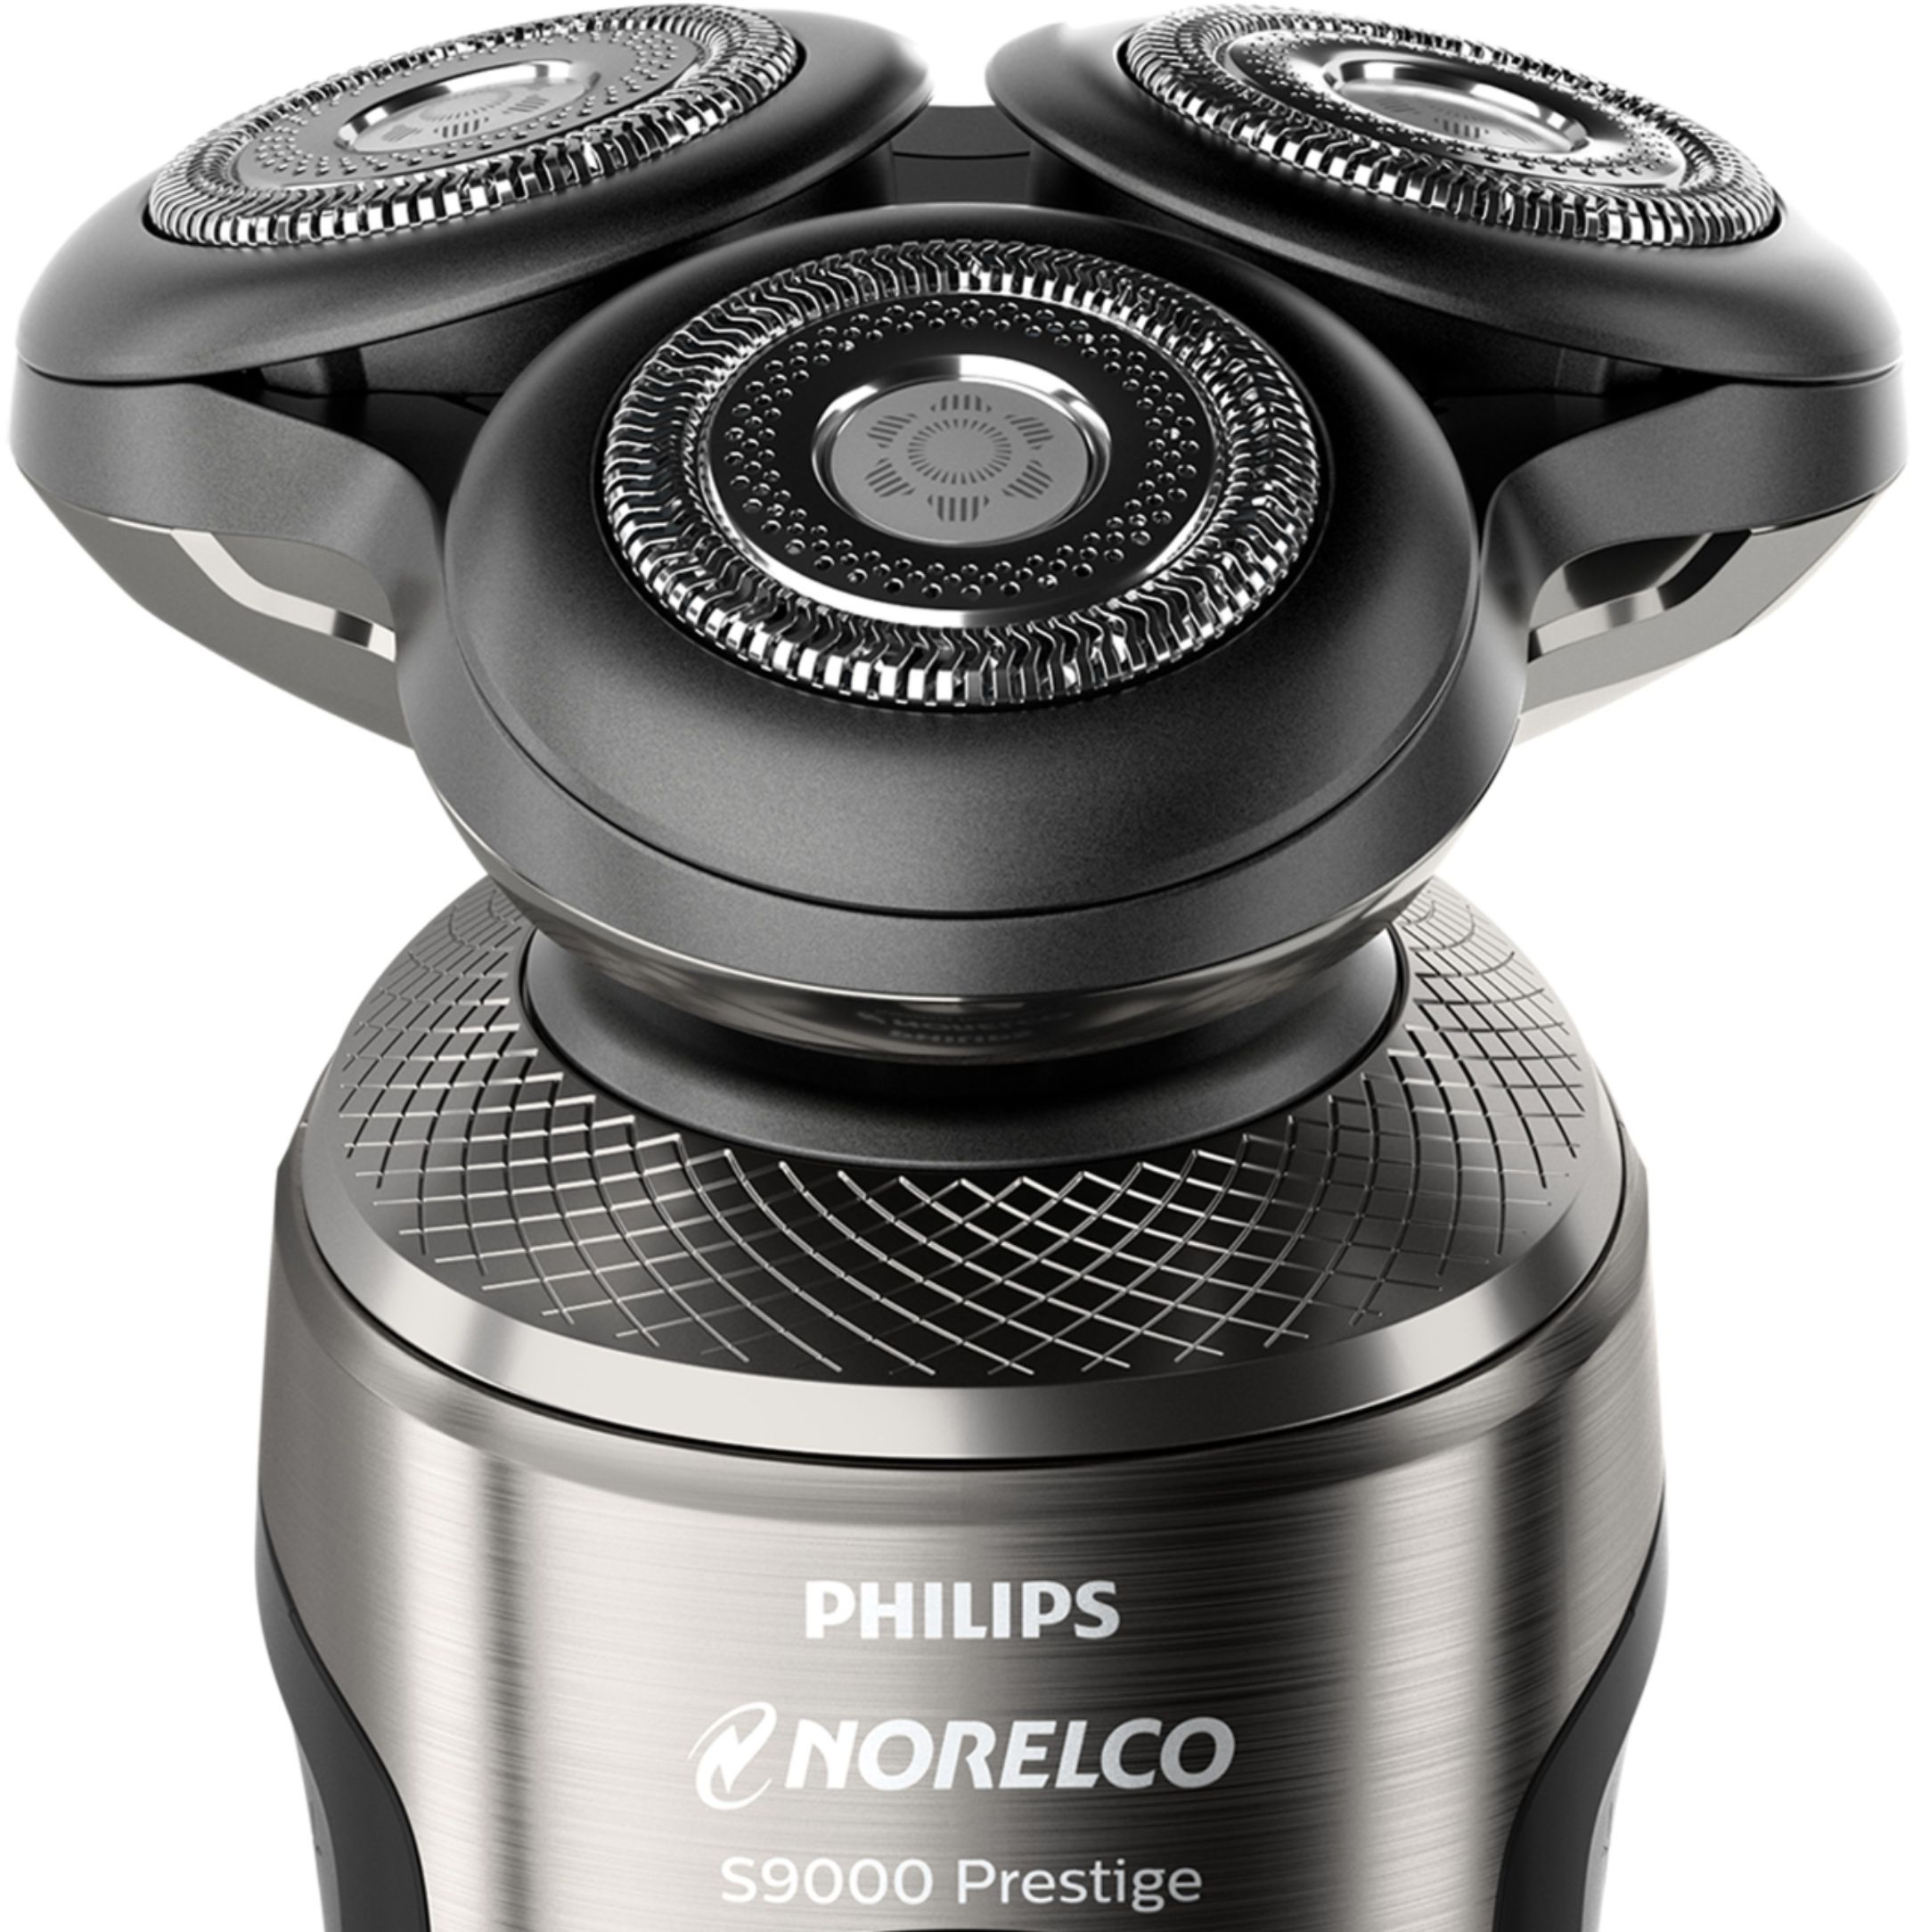 Questions and Answers: Philips Norelco S9000 Prestige Qi-Charge ...